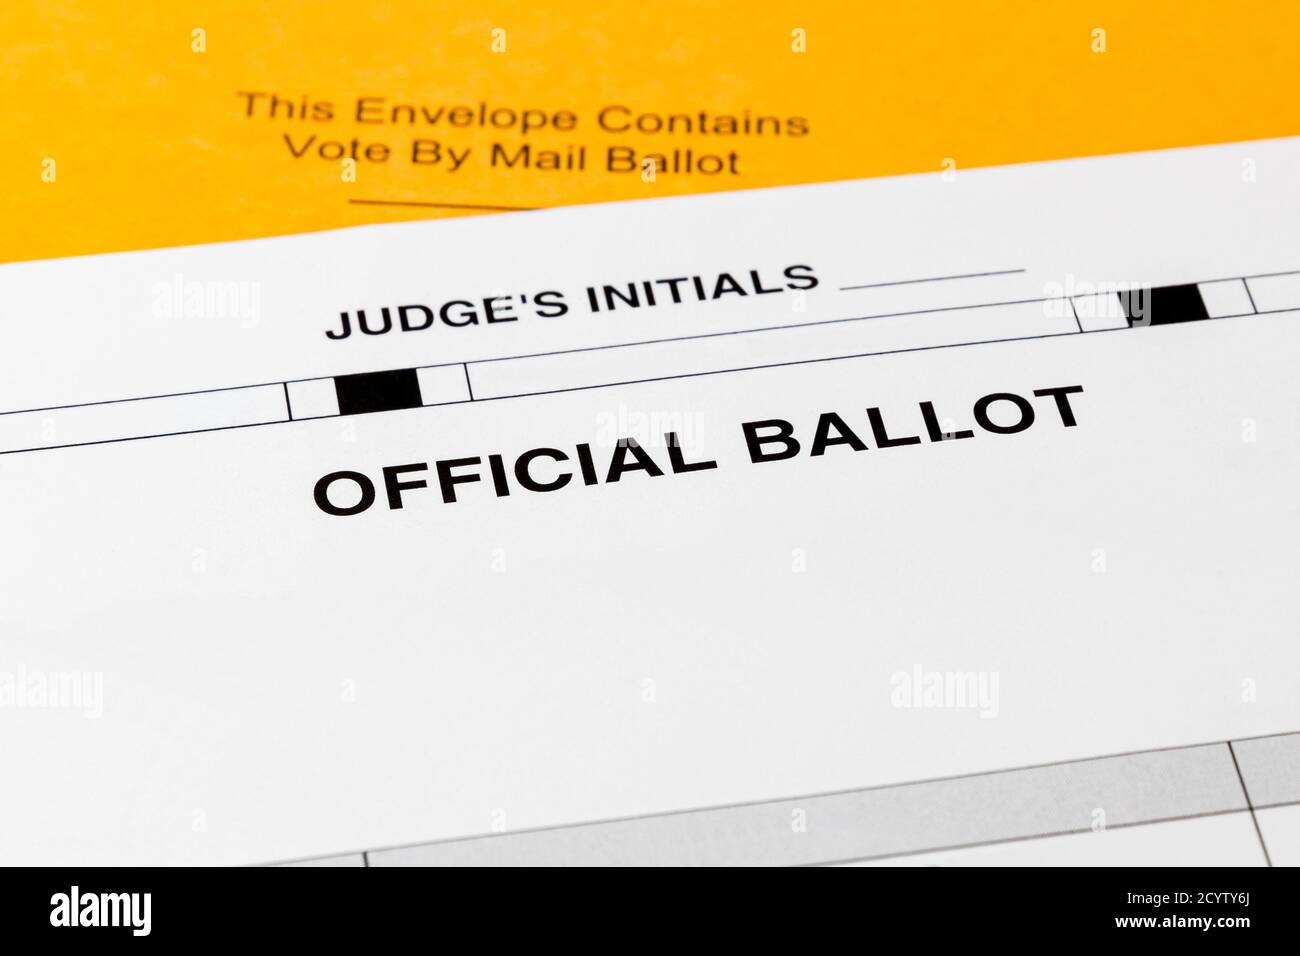 Vote by mail ballot and envelope. Concept of absentee and voting by mail for presidential election during Covid-19 coronavirus pandemic Stock Photo